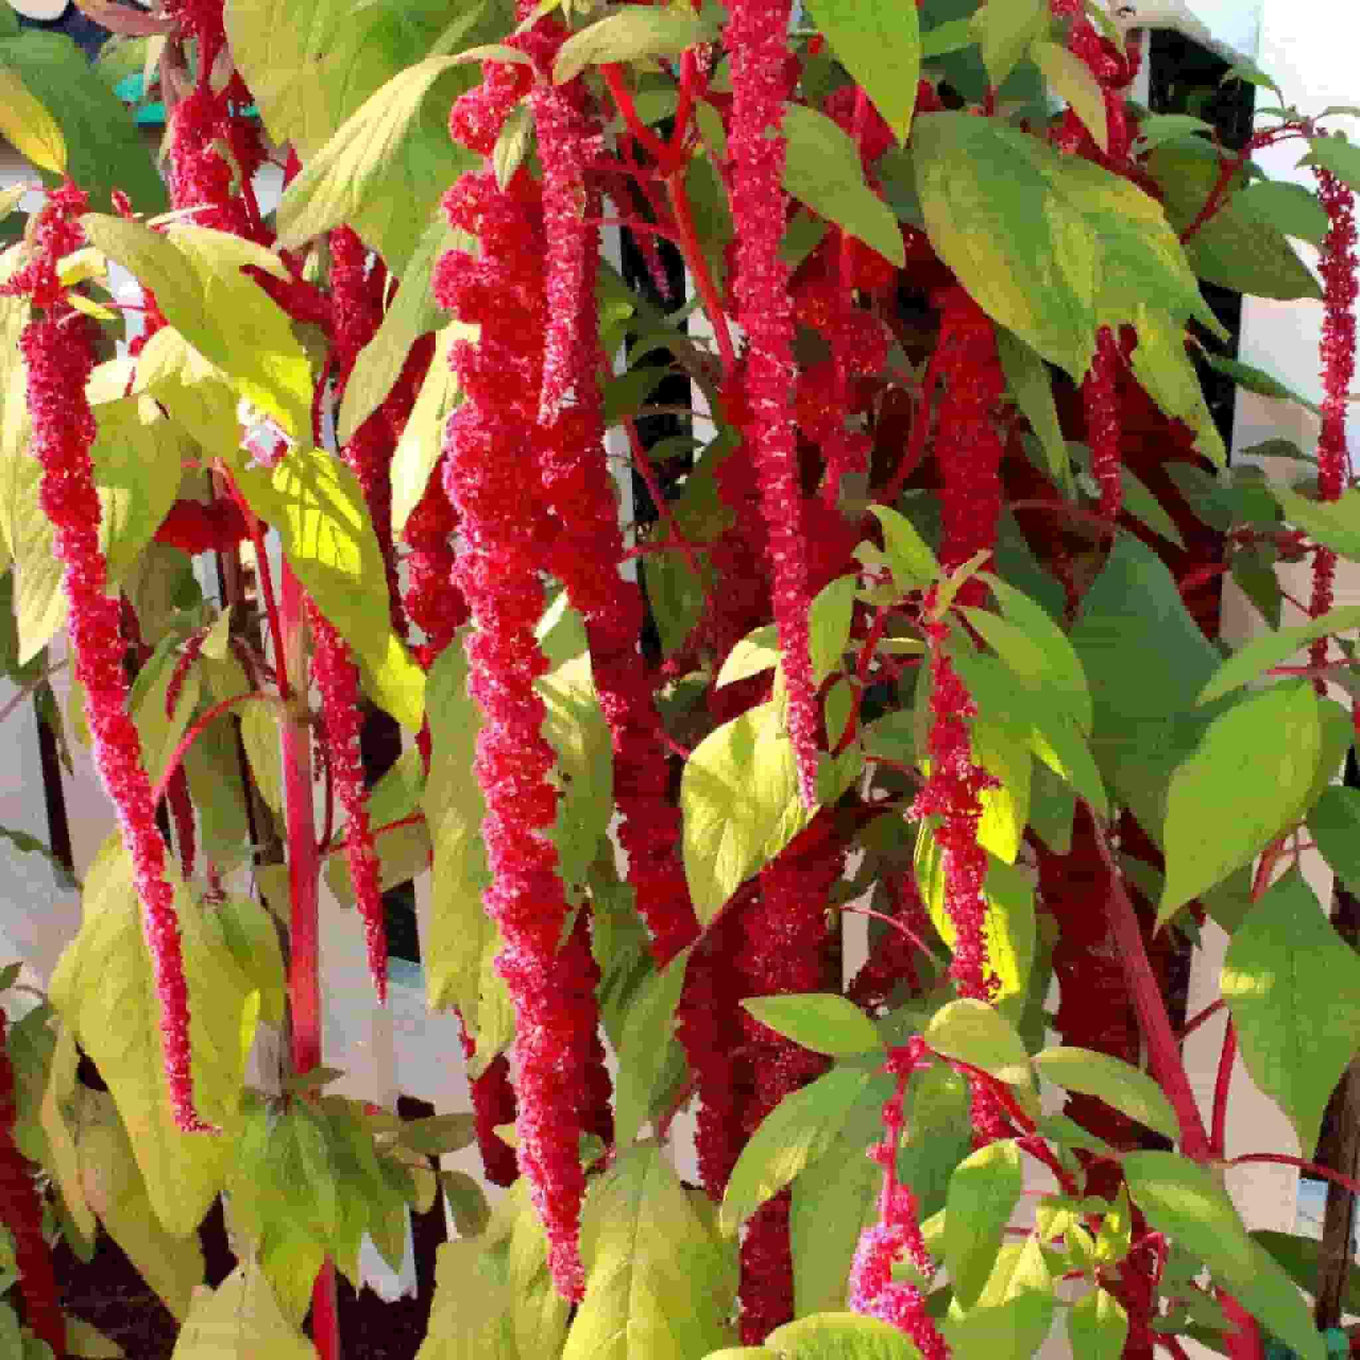 Ferry Morse Amaranth Love Lies Bleeding Flower Seeds_image depicts a fully matured amaranth with beautiful, cascading red flowers.